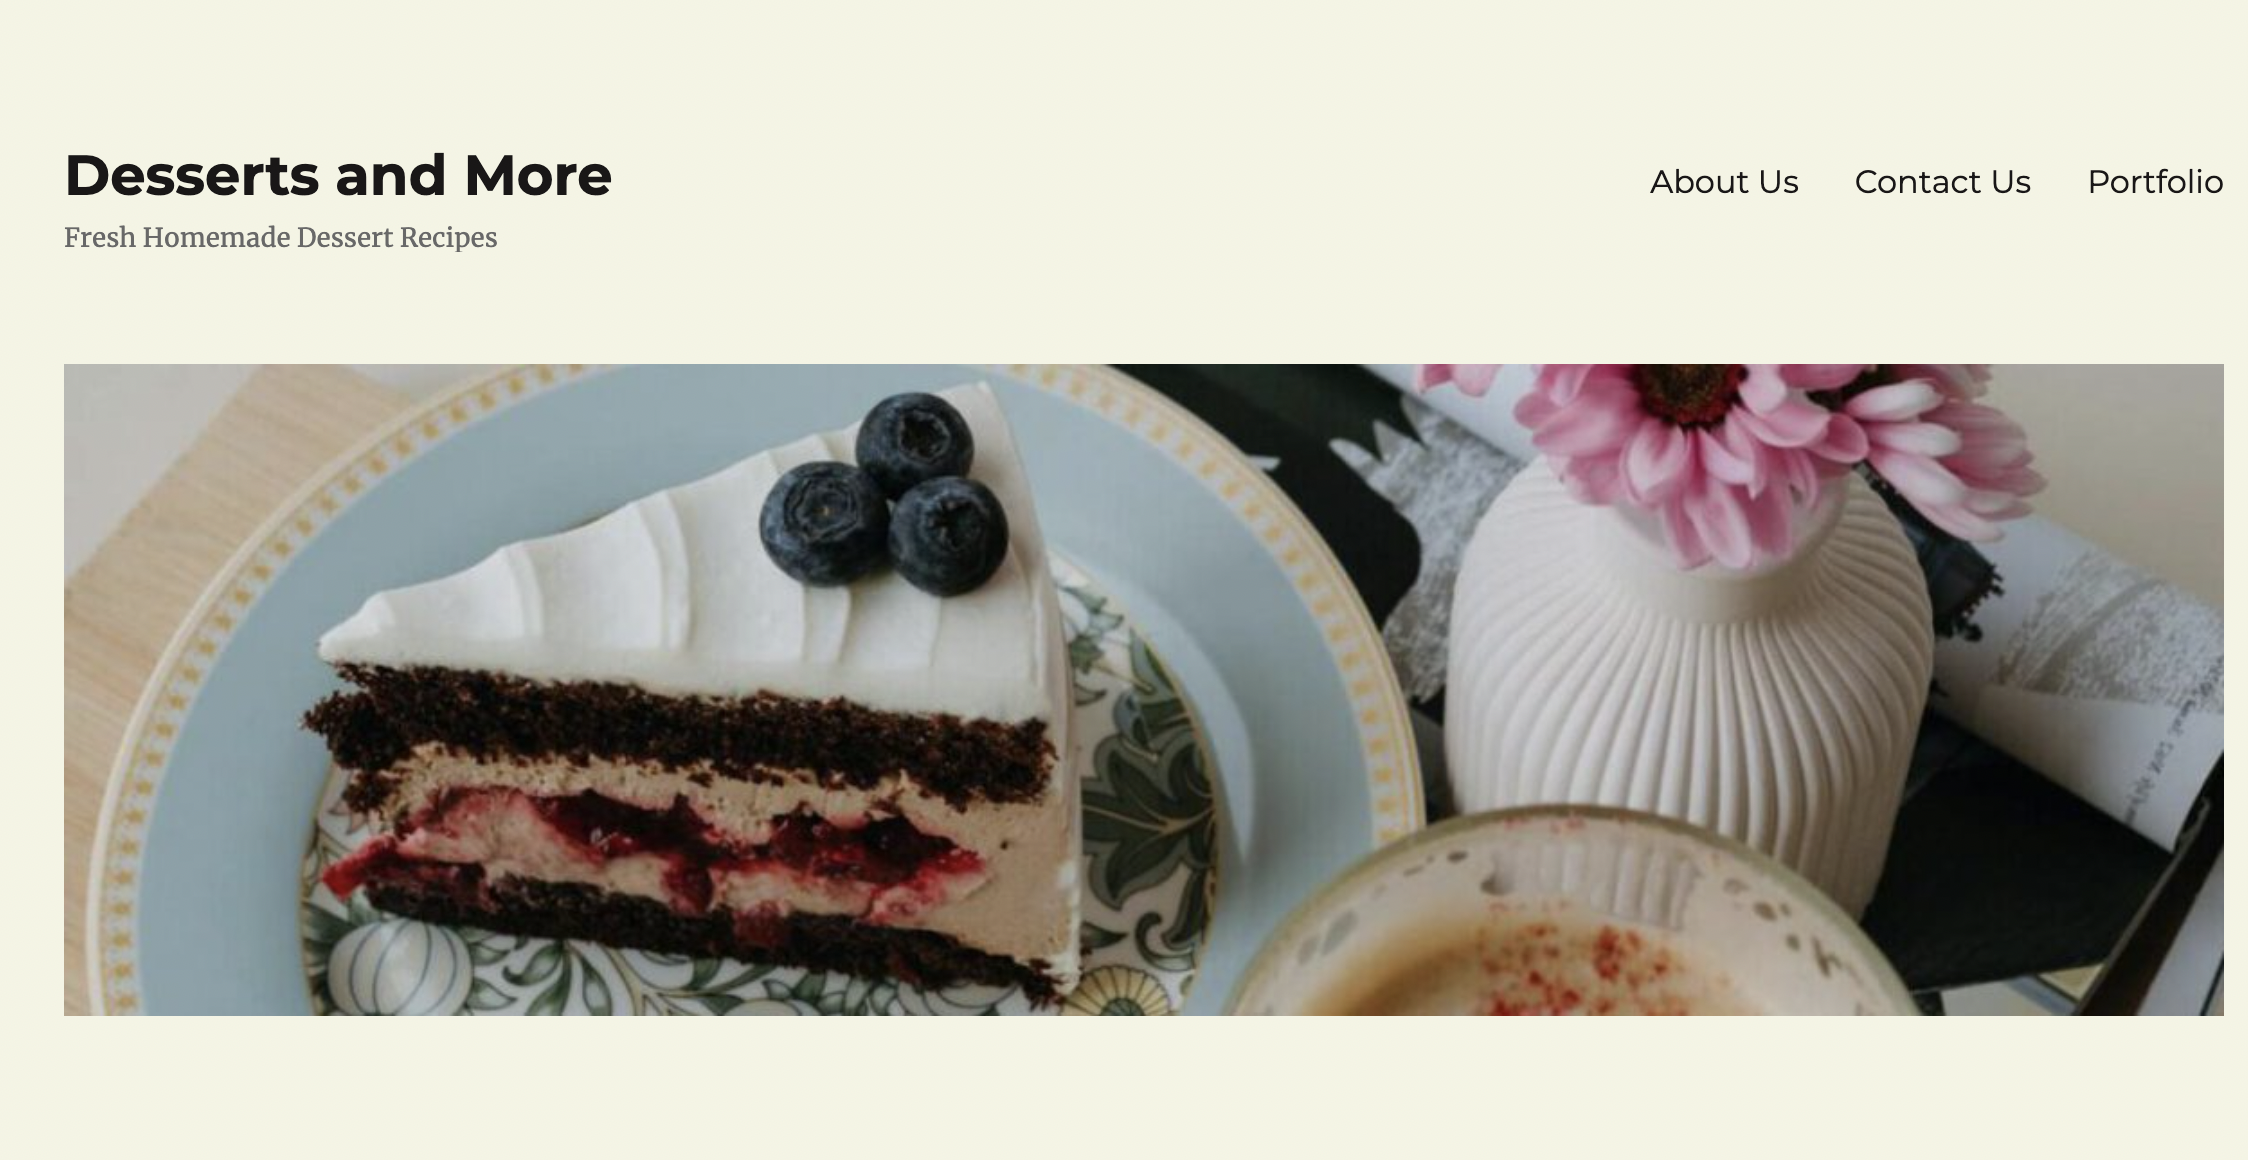 Example project of a WordPress site for a small bakery.